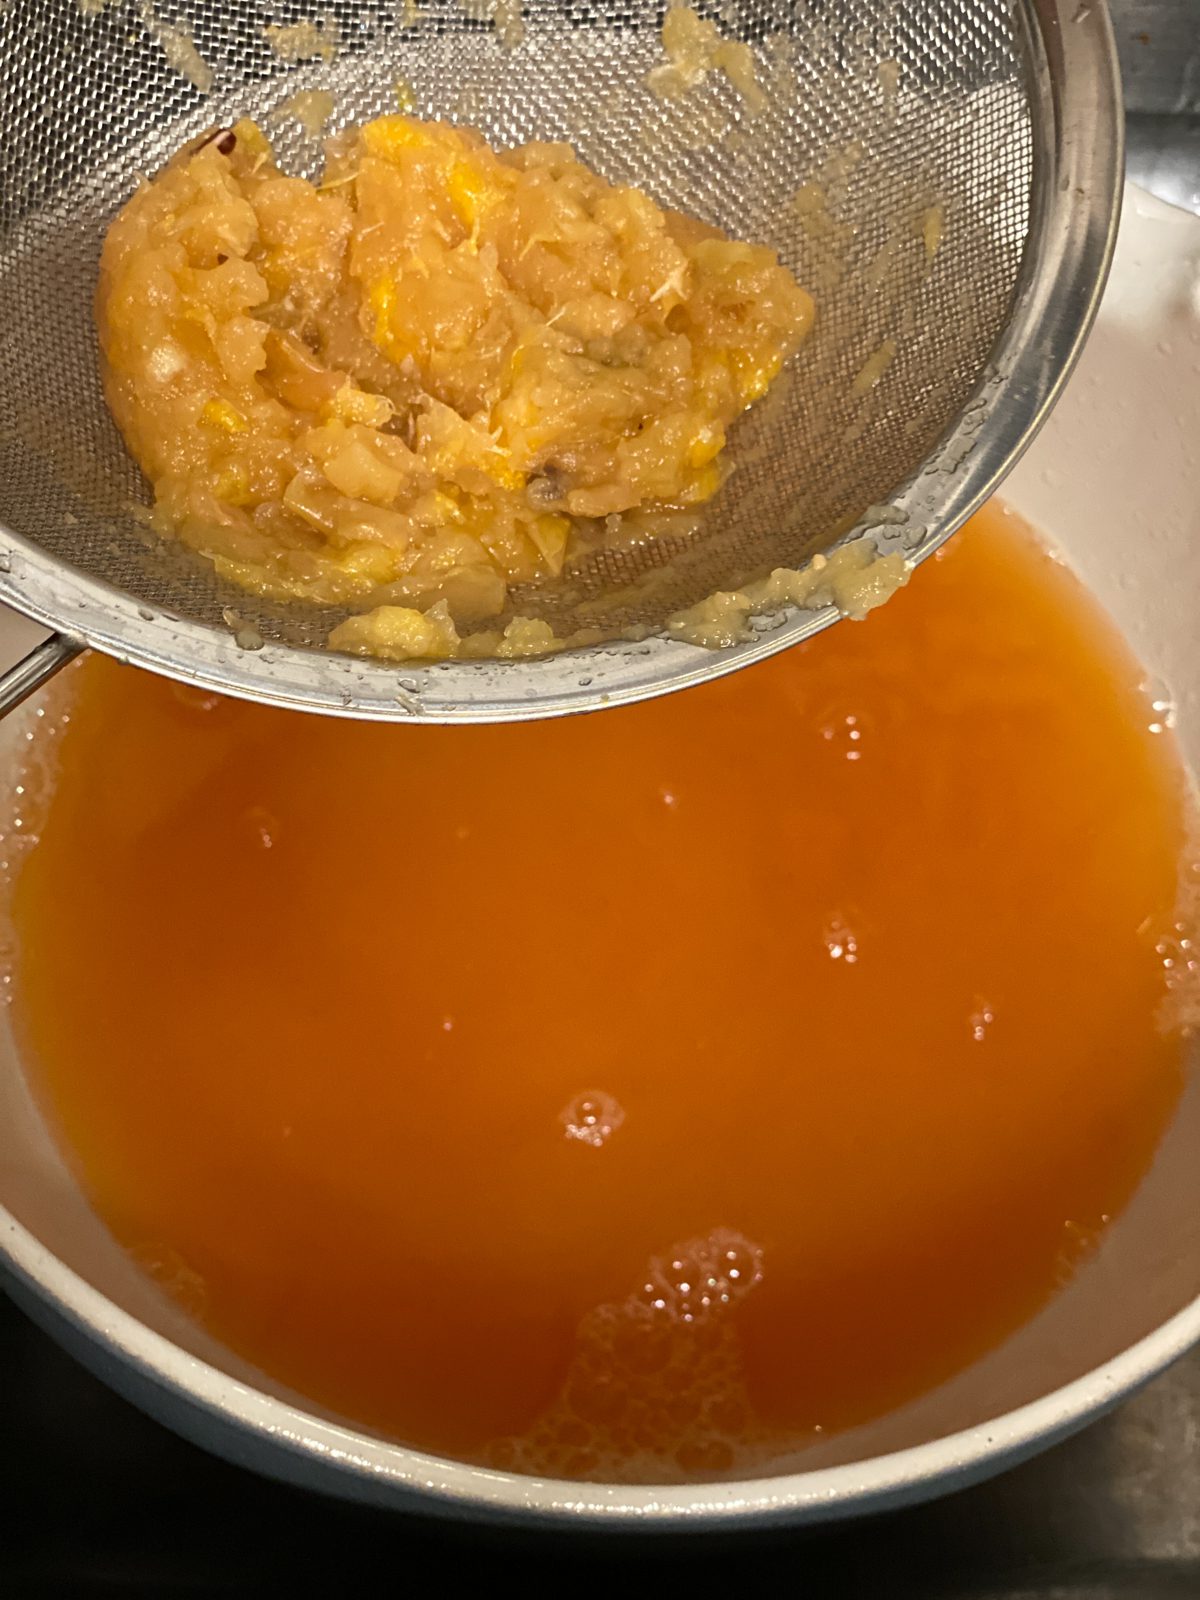 process of using strainer to filter out Vegan Instant Pot Apple Cider ingredients